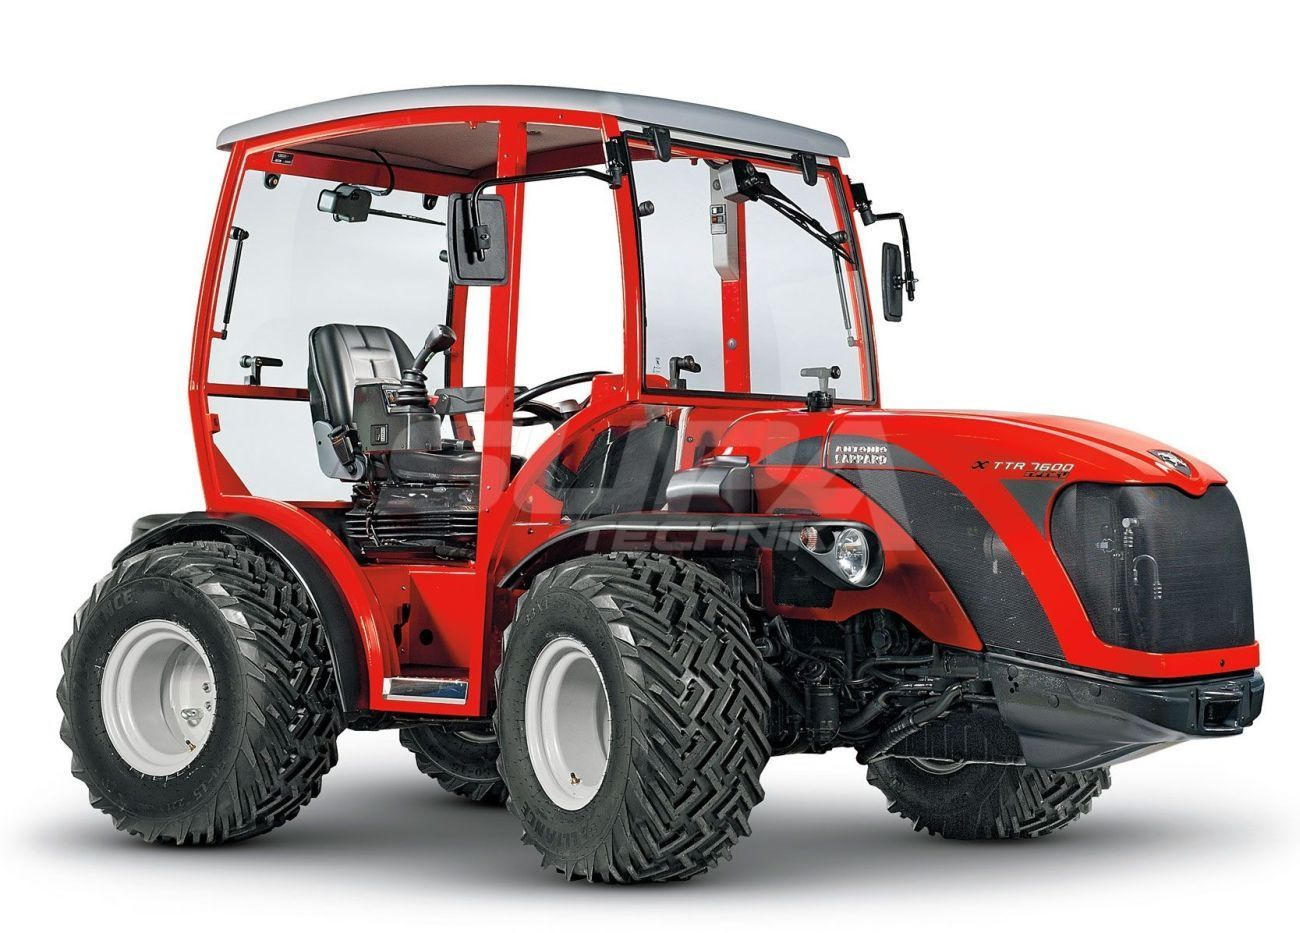 Tractor - mountain tool carrier AC TTR7600 Infinity